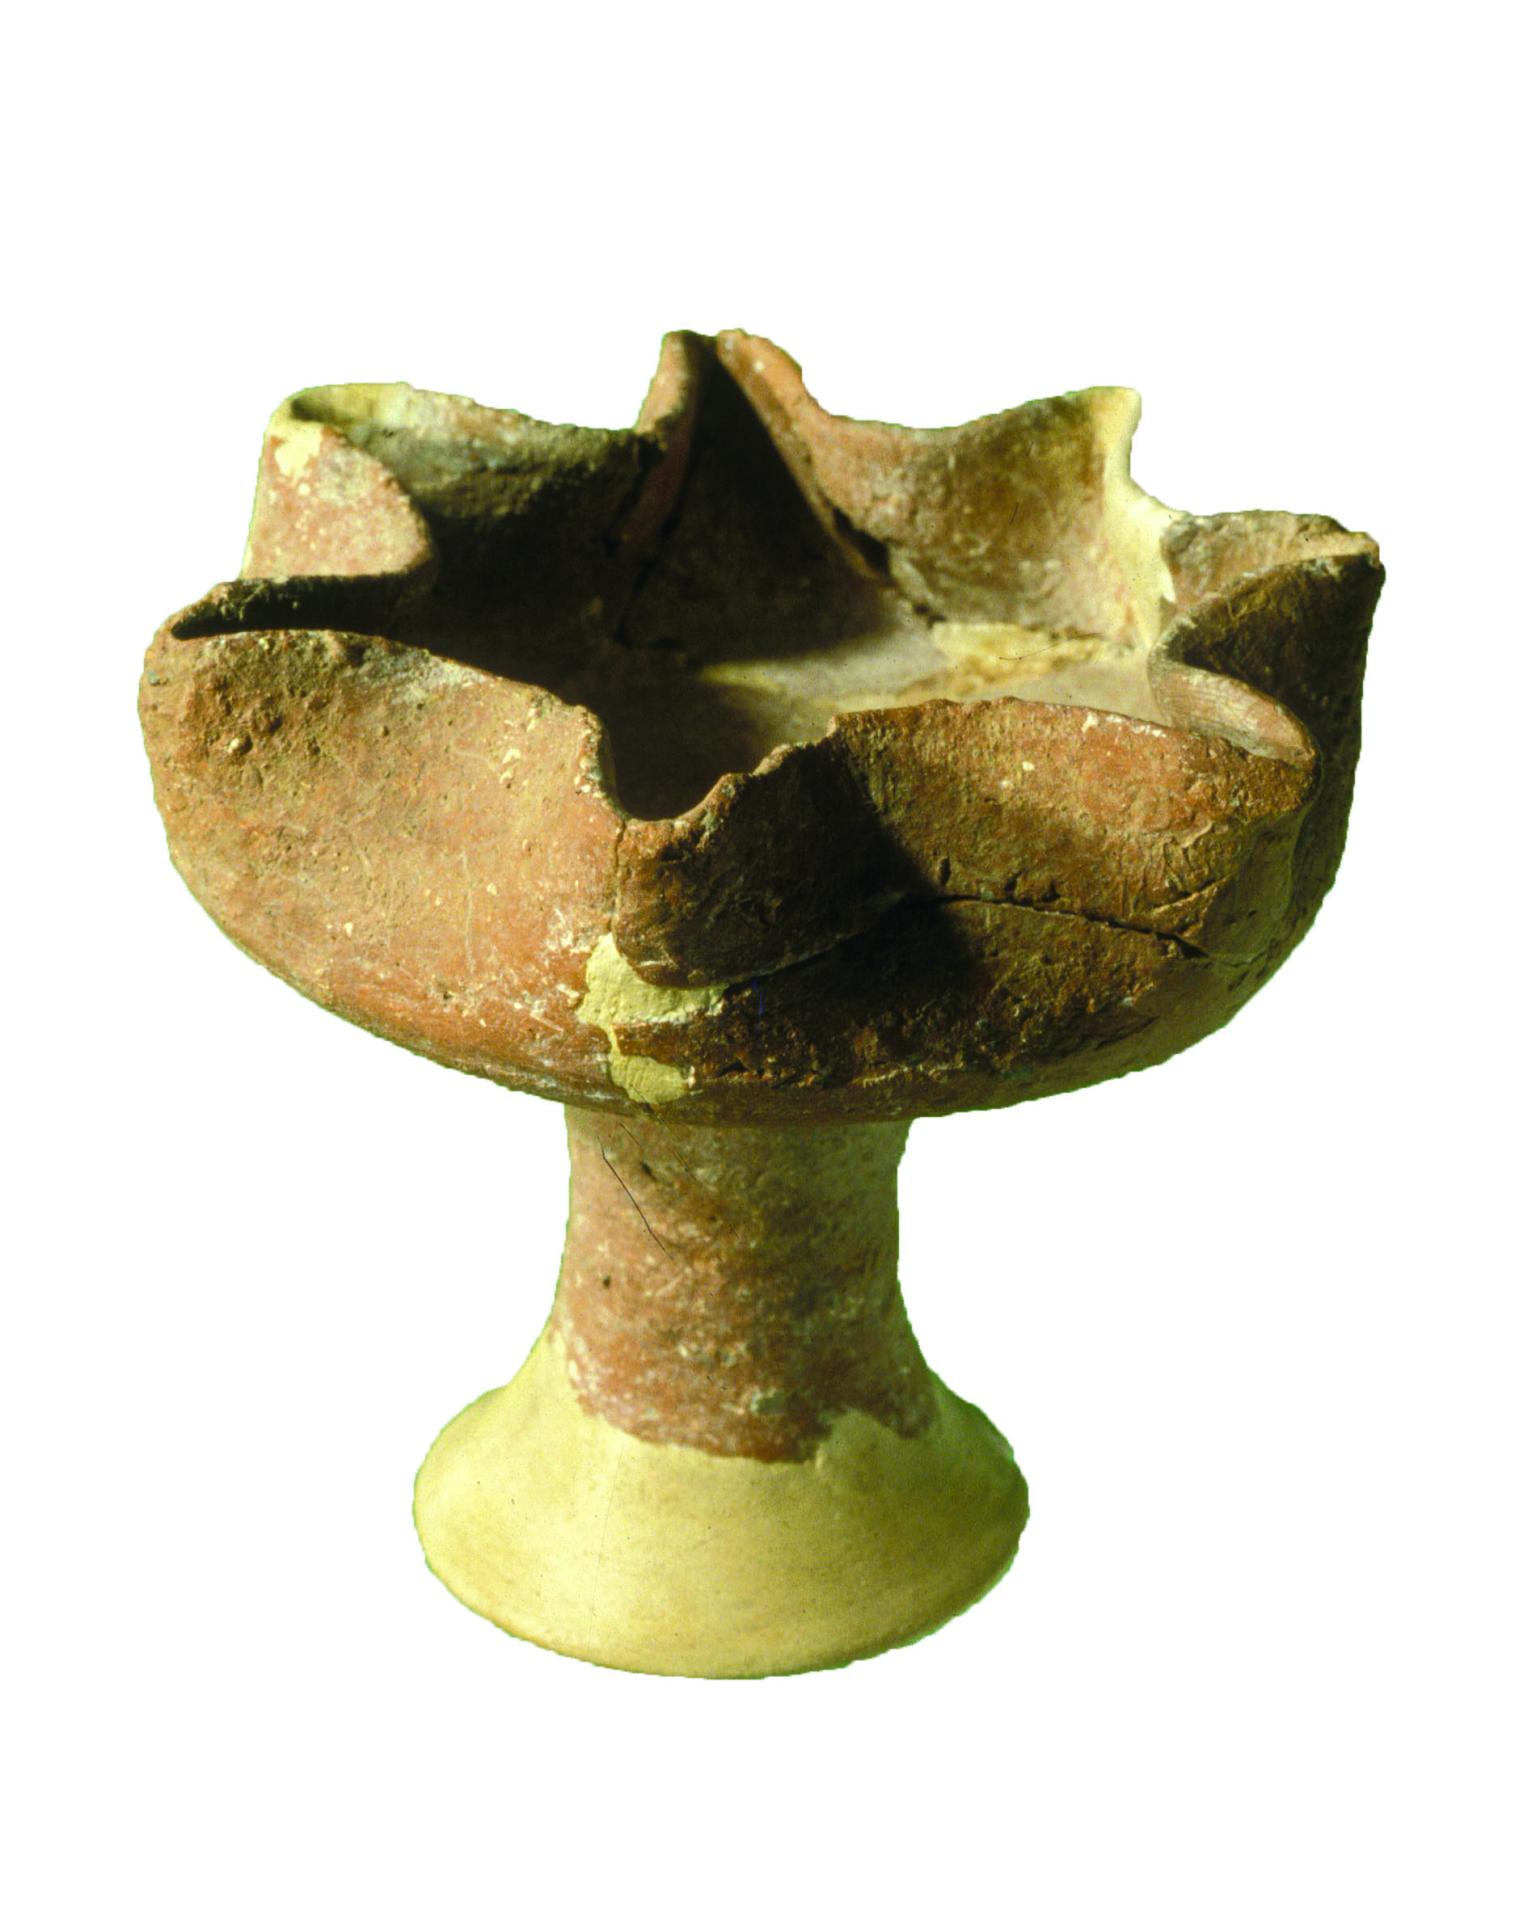 Ceramic oil lamp with seven spouts on a pedestal.